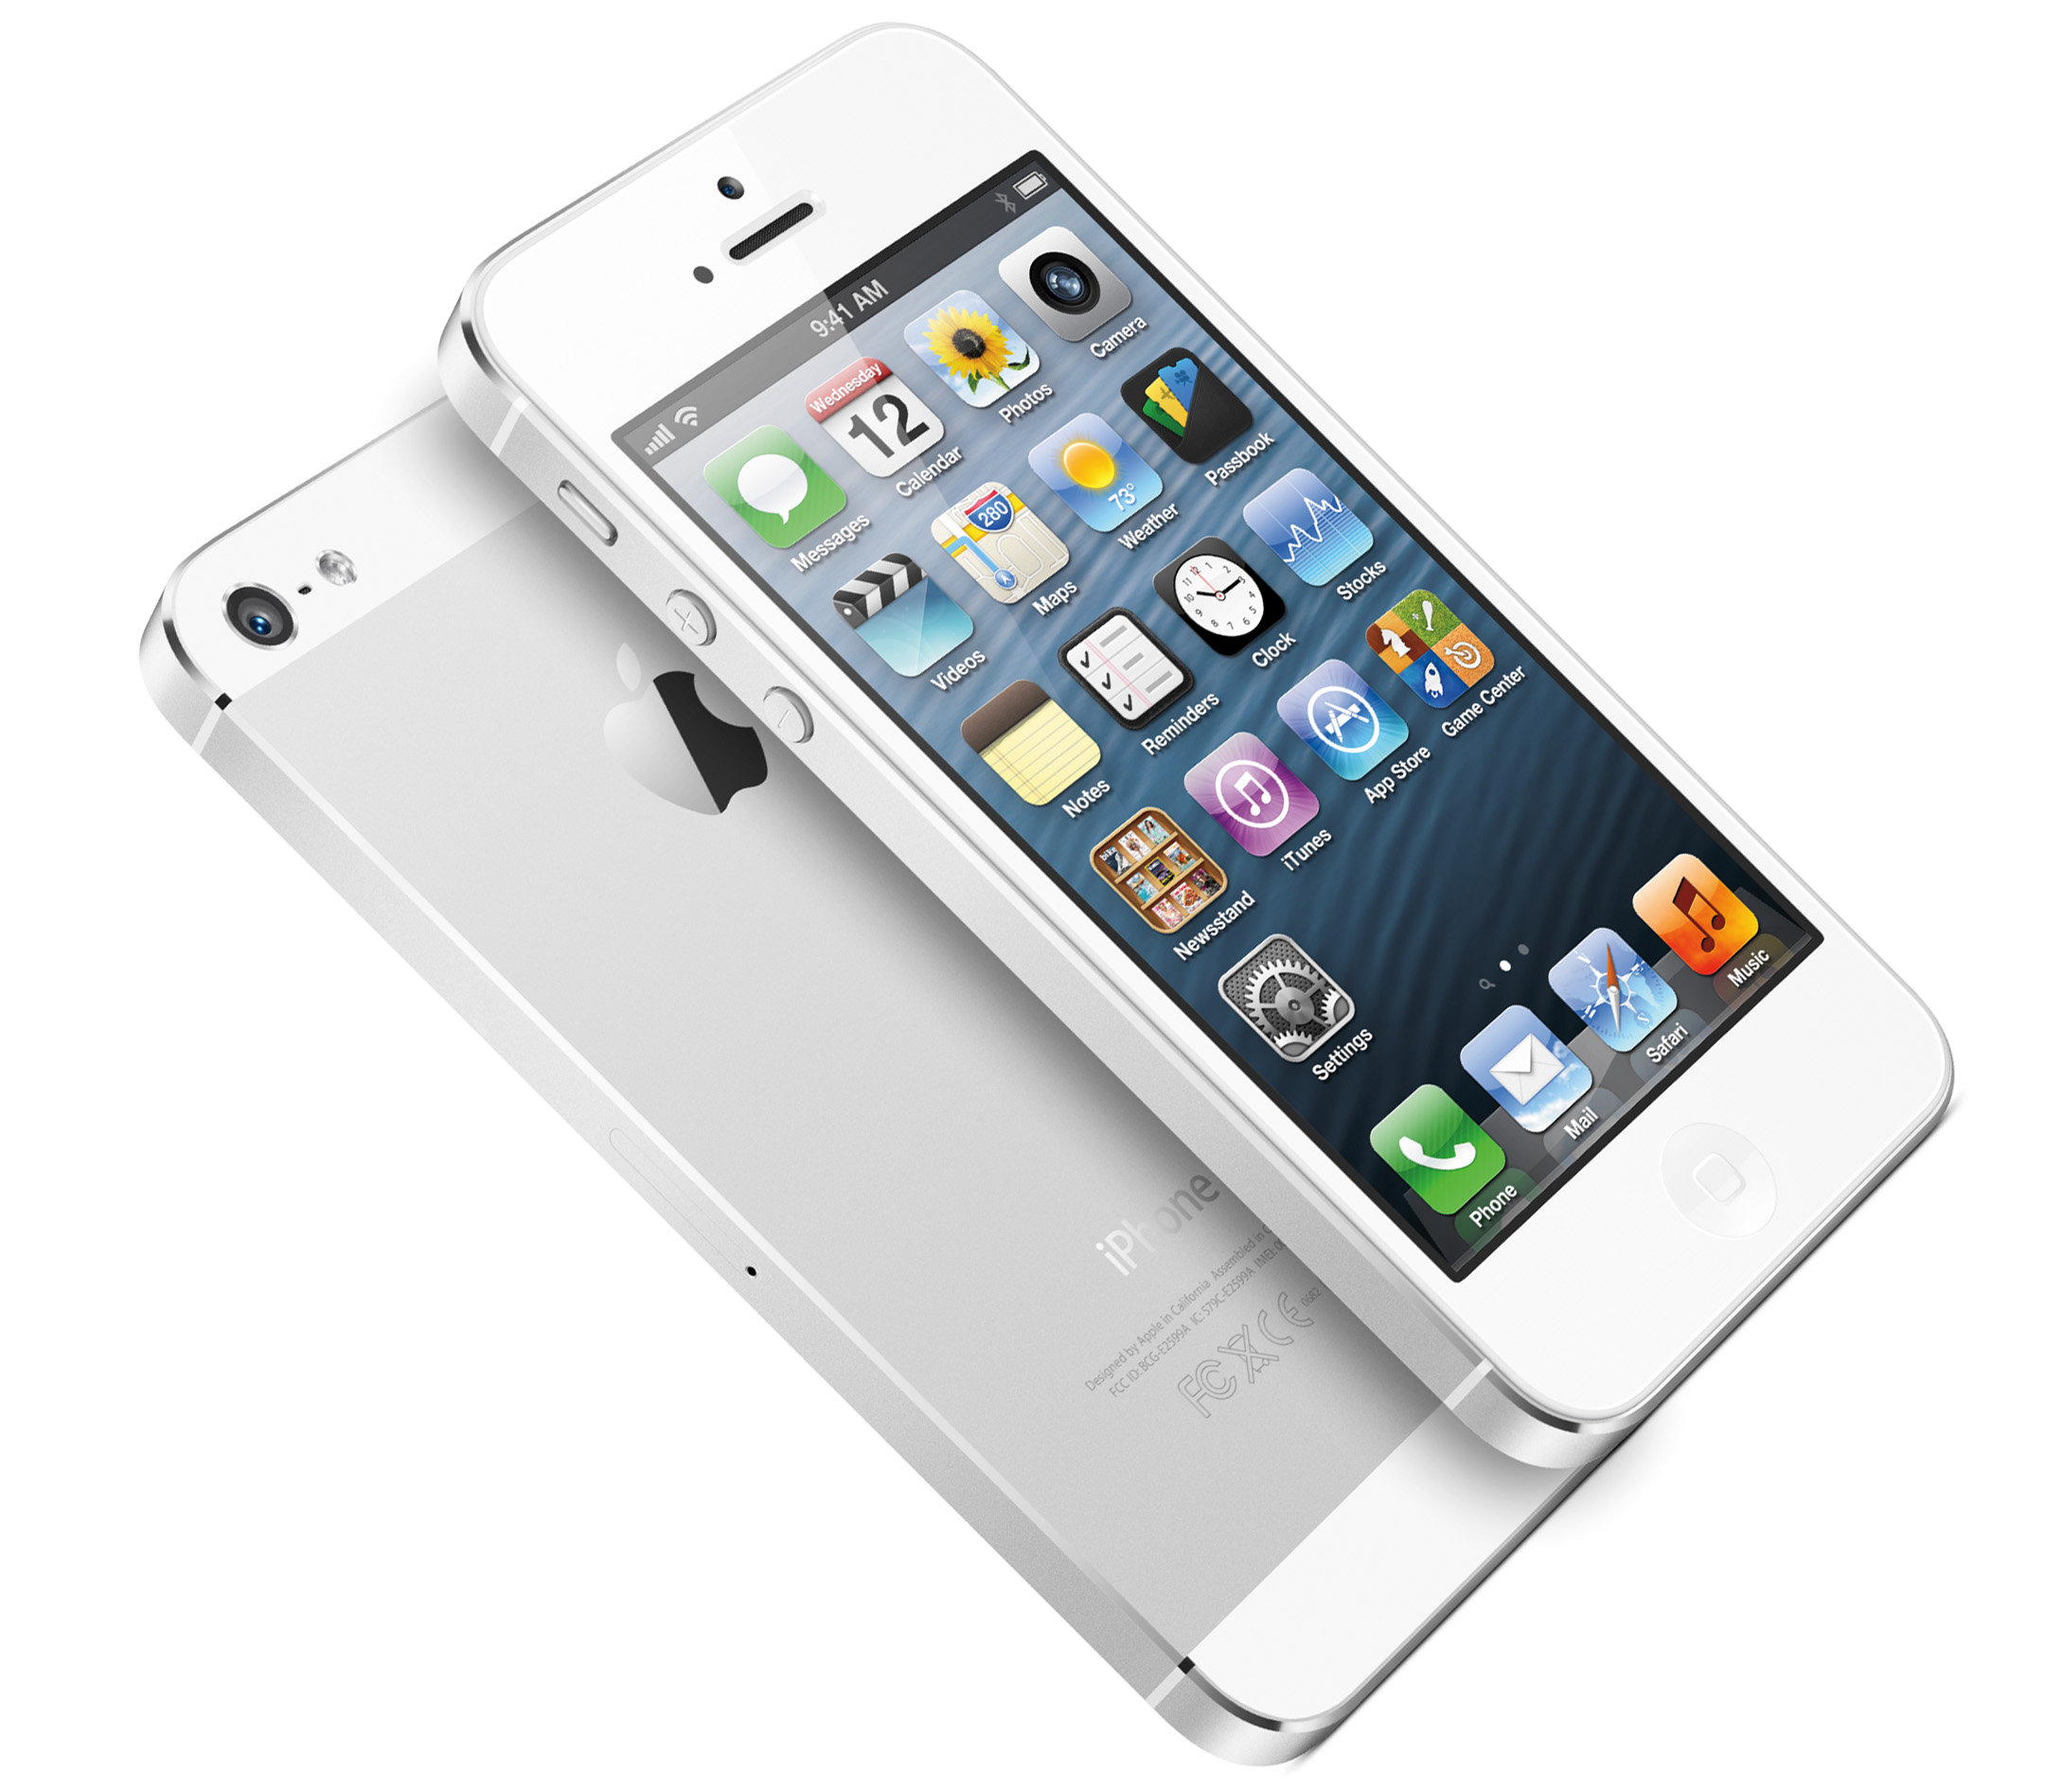 iPhone 5 Review – A Month On from Release